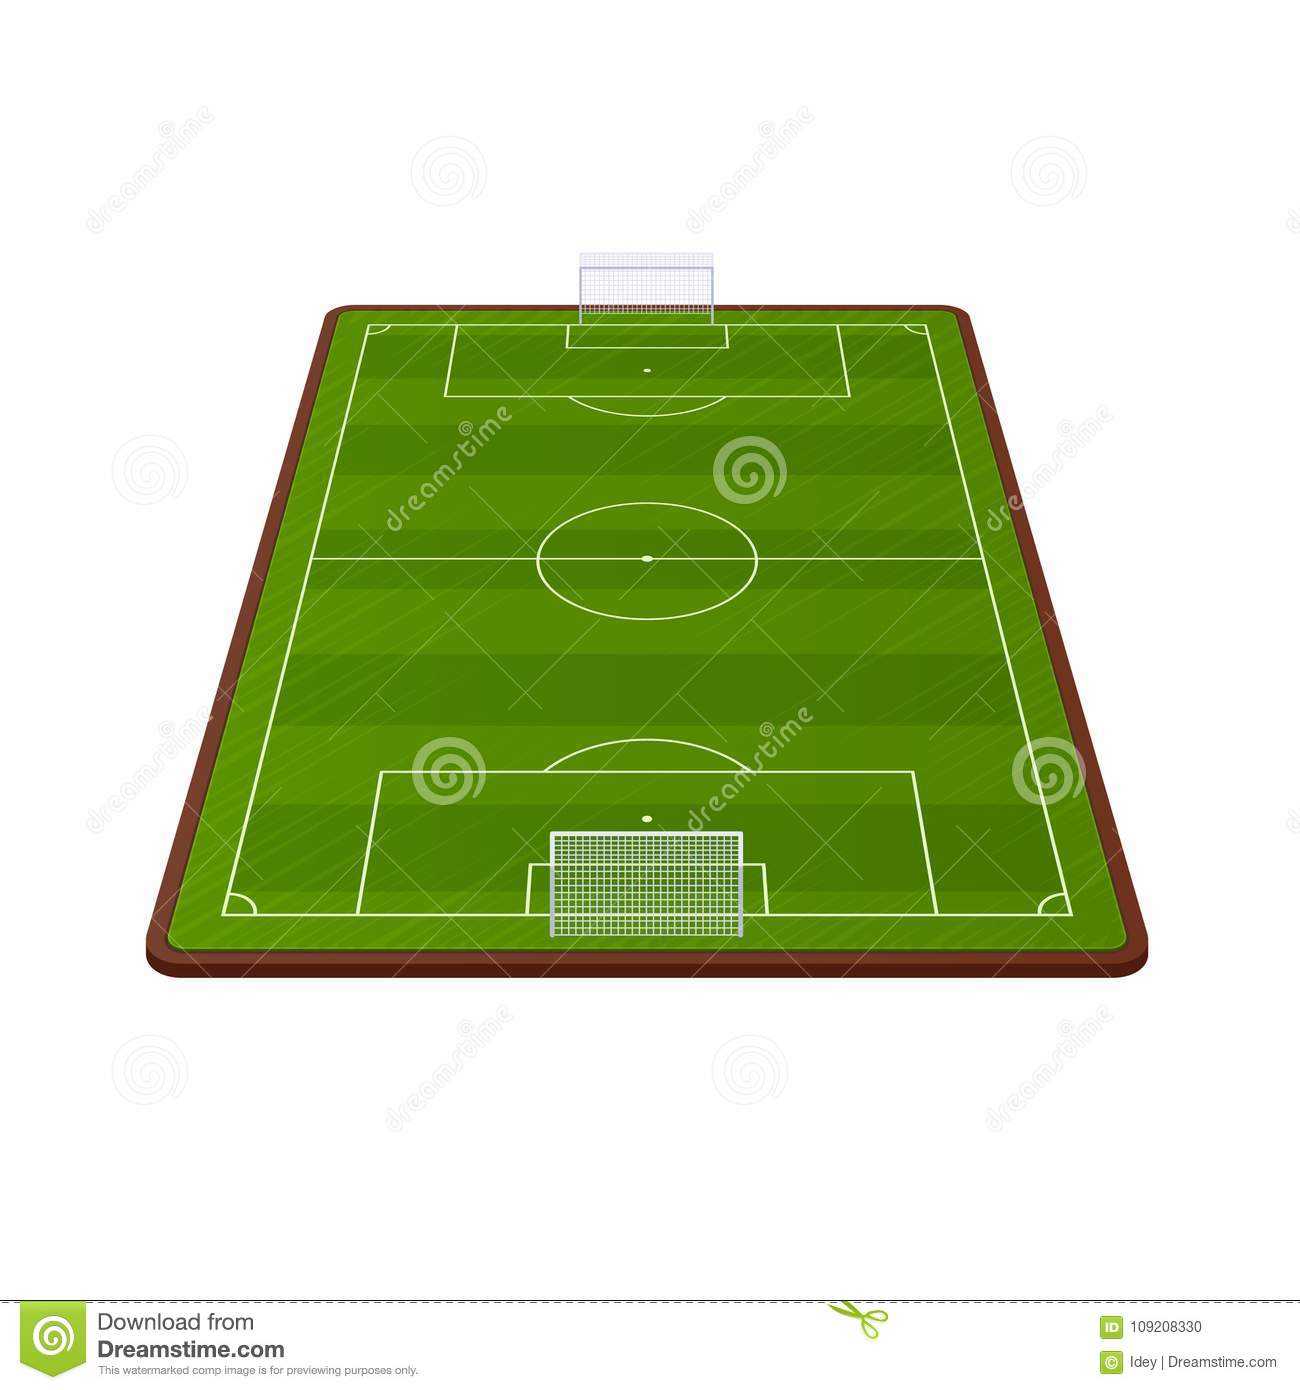 Realistic Football Field Template, Playground With Green Pertaining To Blank Football Field Template